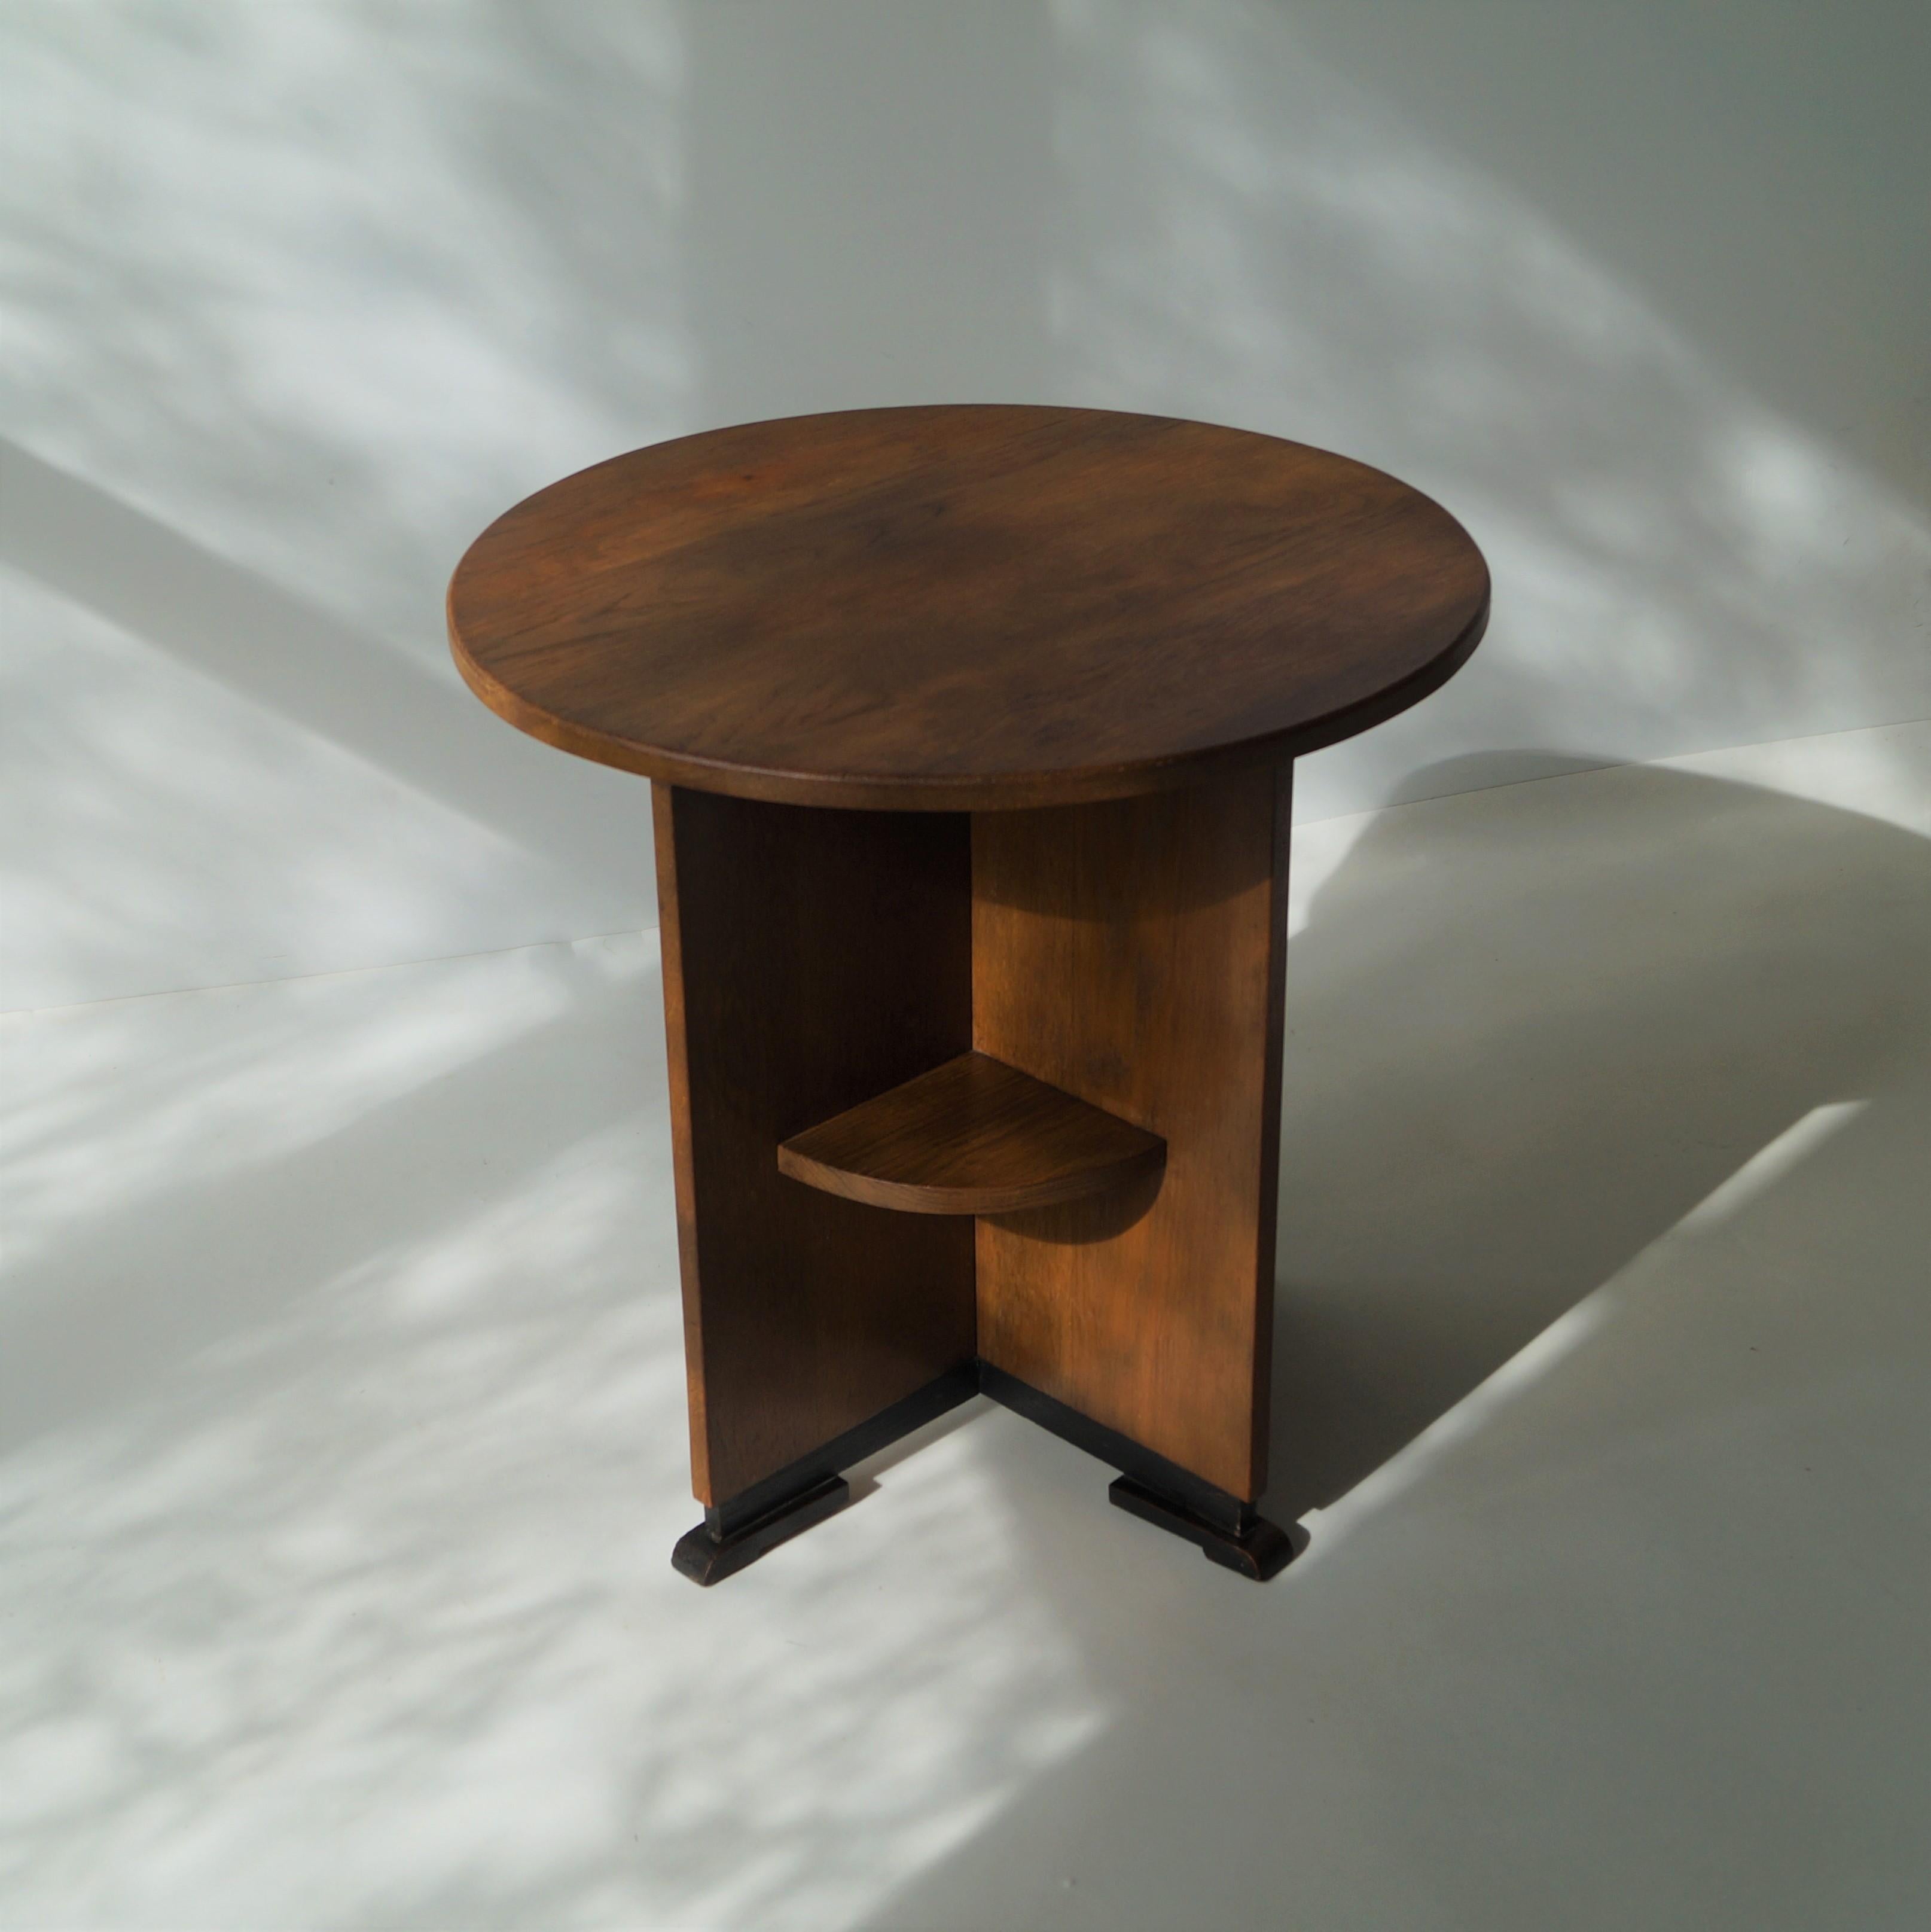 Dutch Art Deco (Haagse School) Occasional Table with Modernist Lines, 1920s 10